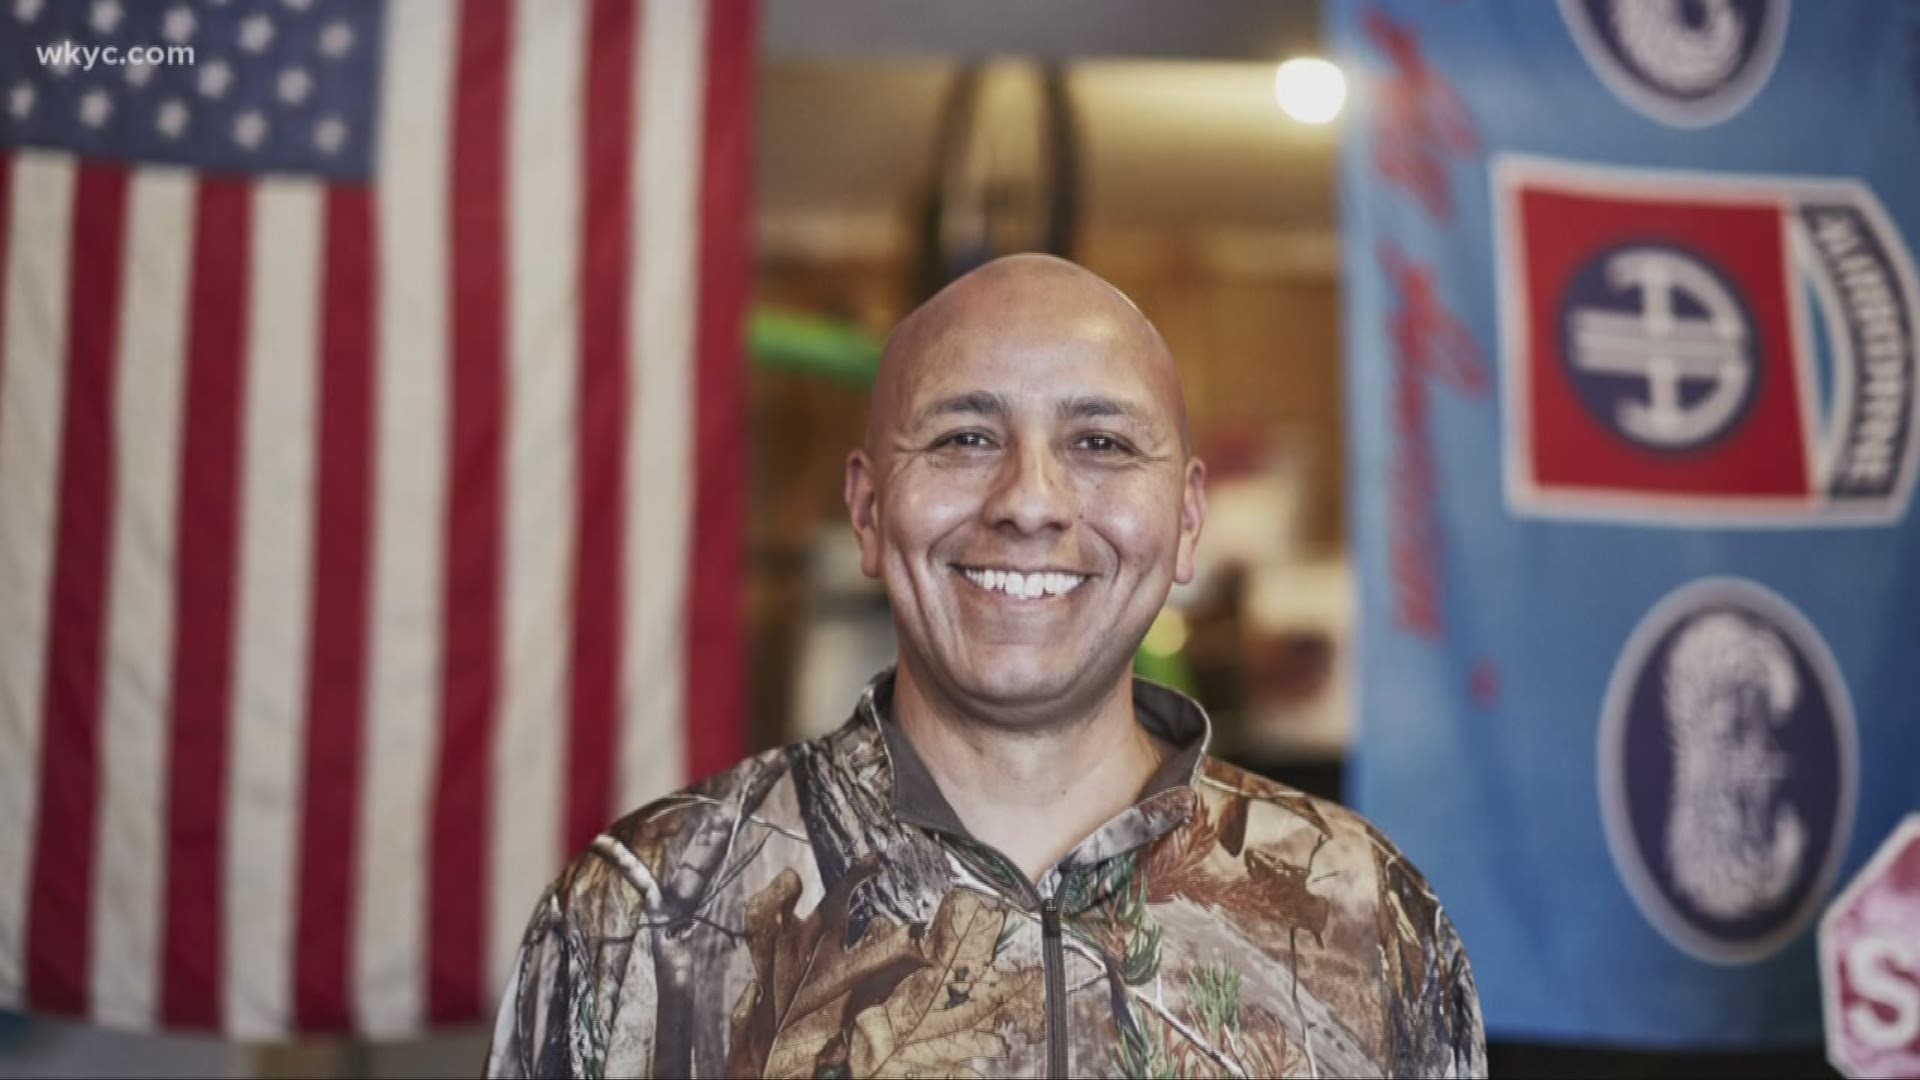 May 8, 2019: After surviving a horrifying crash in 2010, Pete Soto now spends his time as a volunteer with MetroHealth as an inspiration to others.